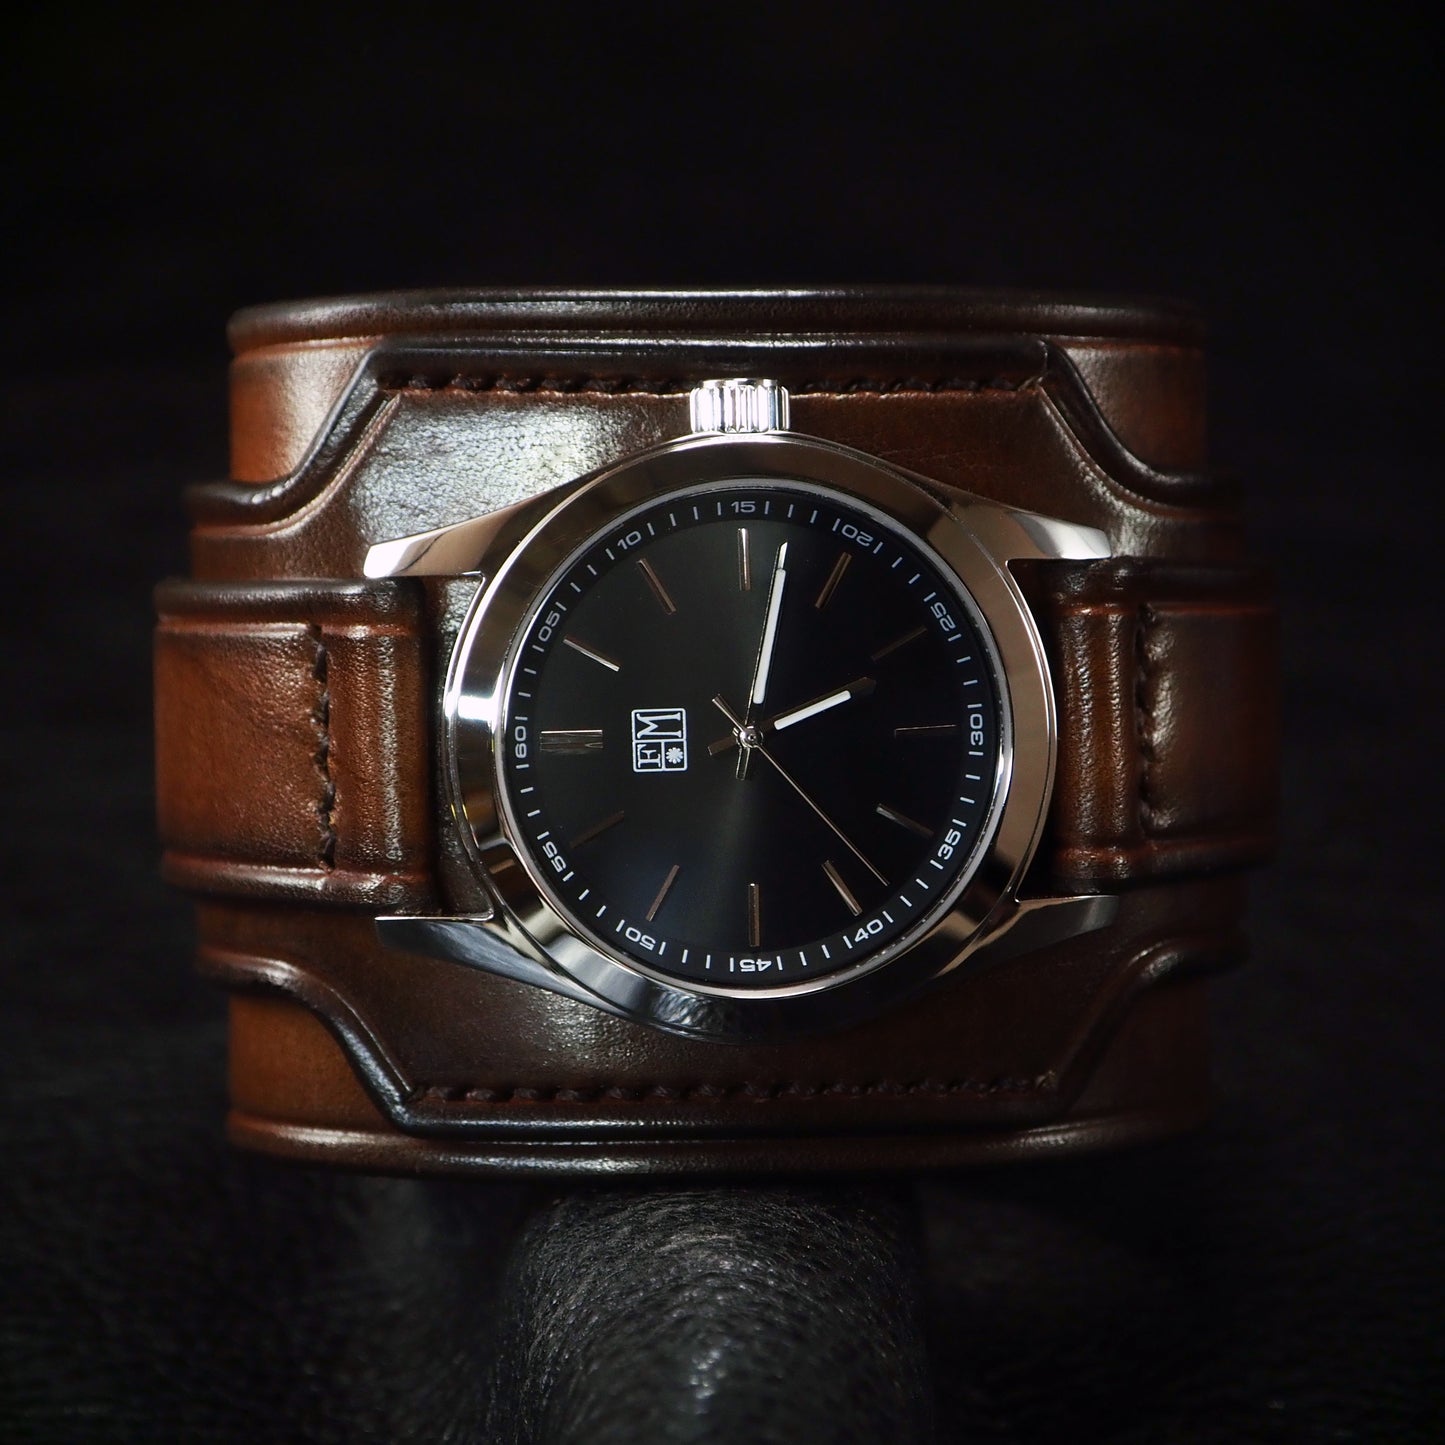 Rich Brown Leather cuff watch : Rich tones layered leather watchband. Hand Made In New York